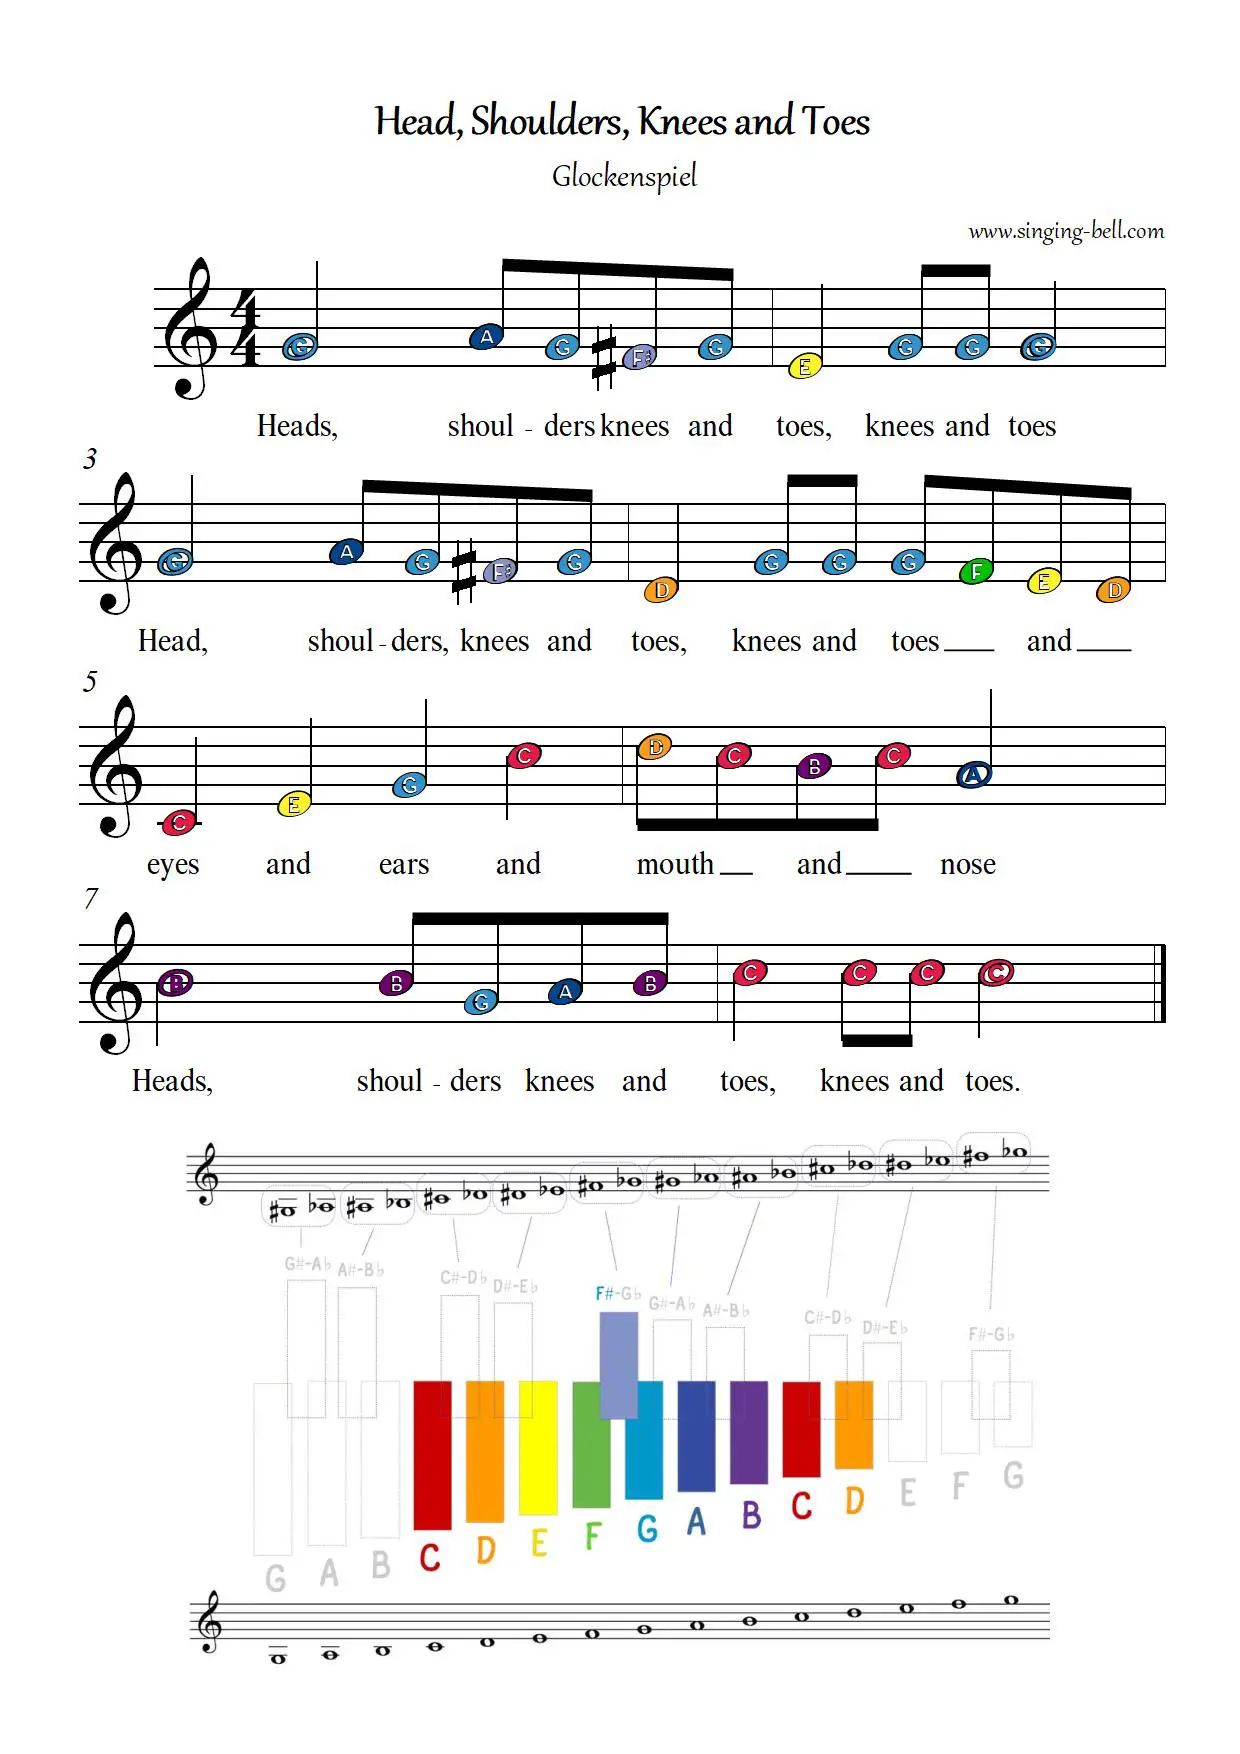 Head-Shoulder-Knees-and-Toes free xylophone glockenspiel sheet music color notes chart pdf